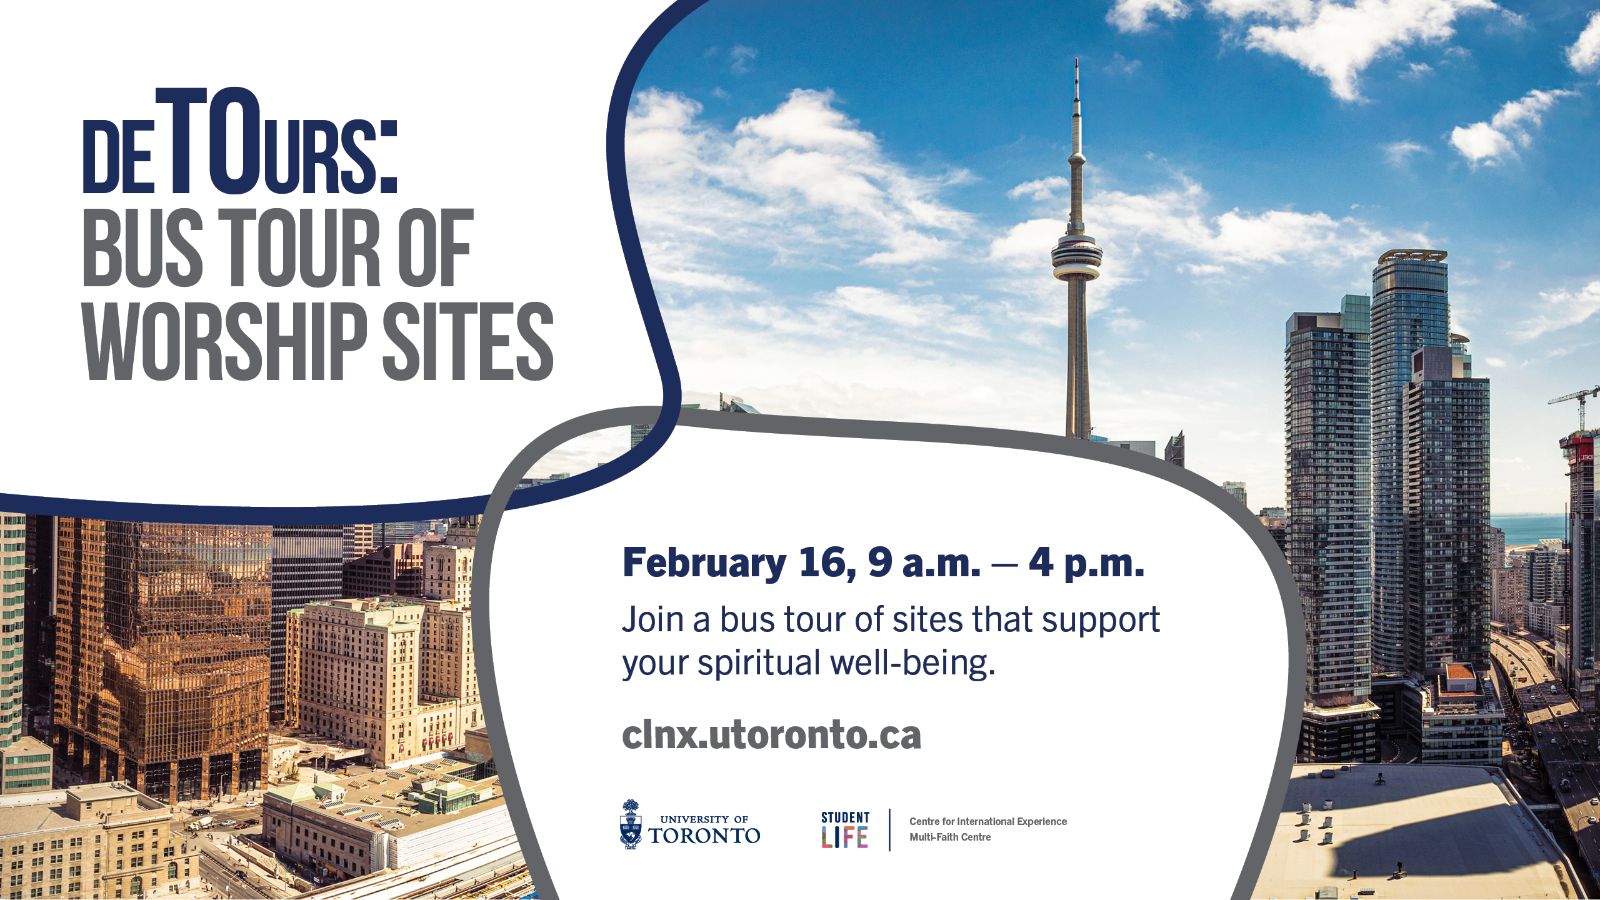 A photo of the city of Toronto skyline, with text "deTOurs: Bus Tour of Worship Sites. February 16, 9 a.m. - 4 p.m.; Join a bus tour of sites that support your spiritual well-being. clnx.utoronto.ca."